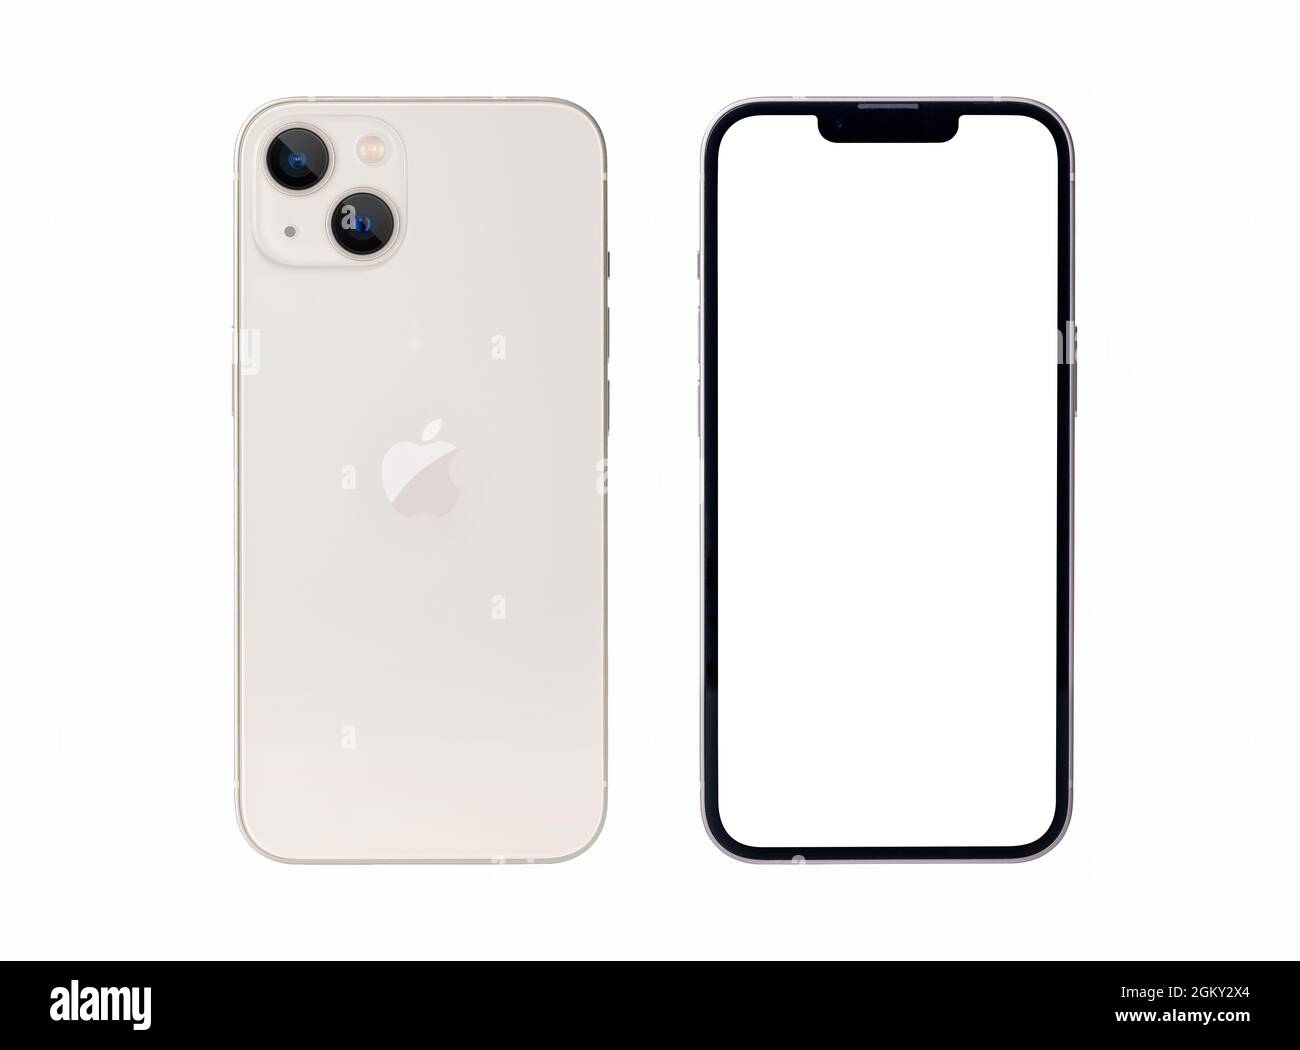 Antalya, Turkey - September 15, 2021: Newly released iphone 13 starlight color mockup set with back and front angles Stock Photo